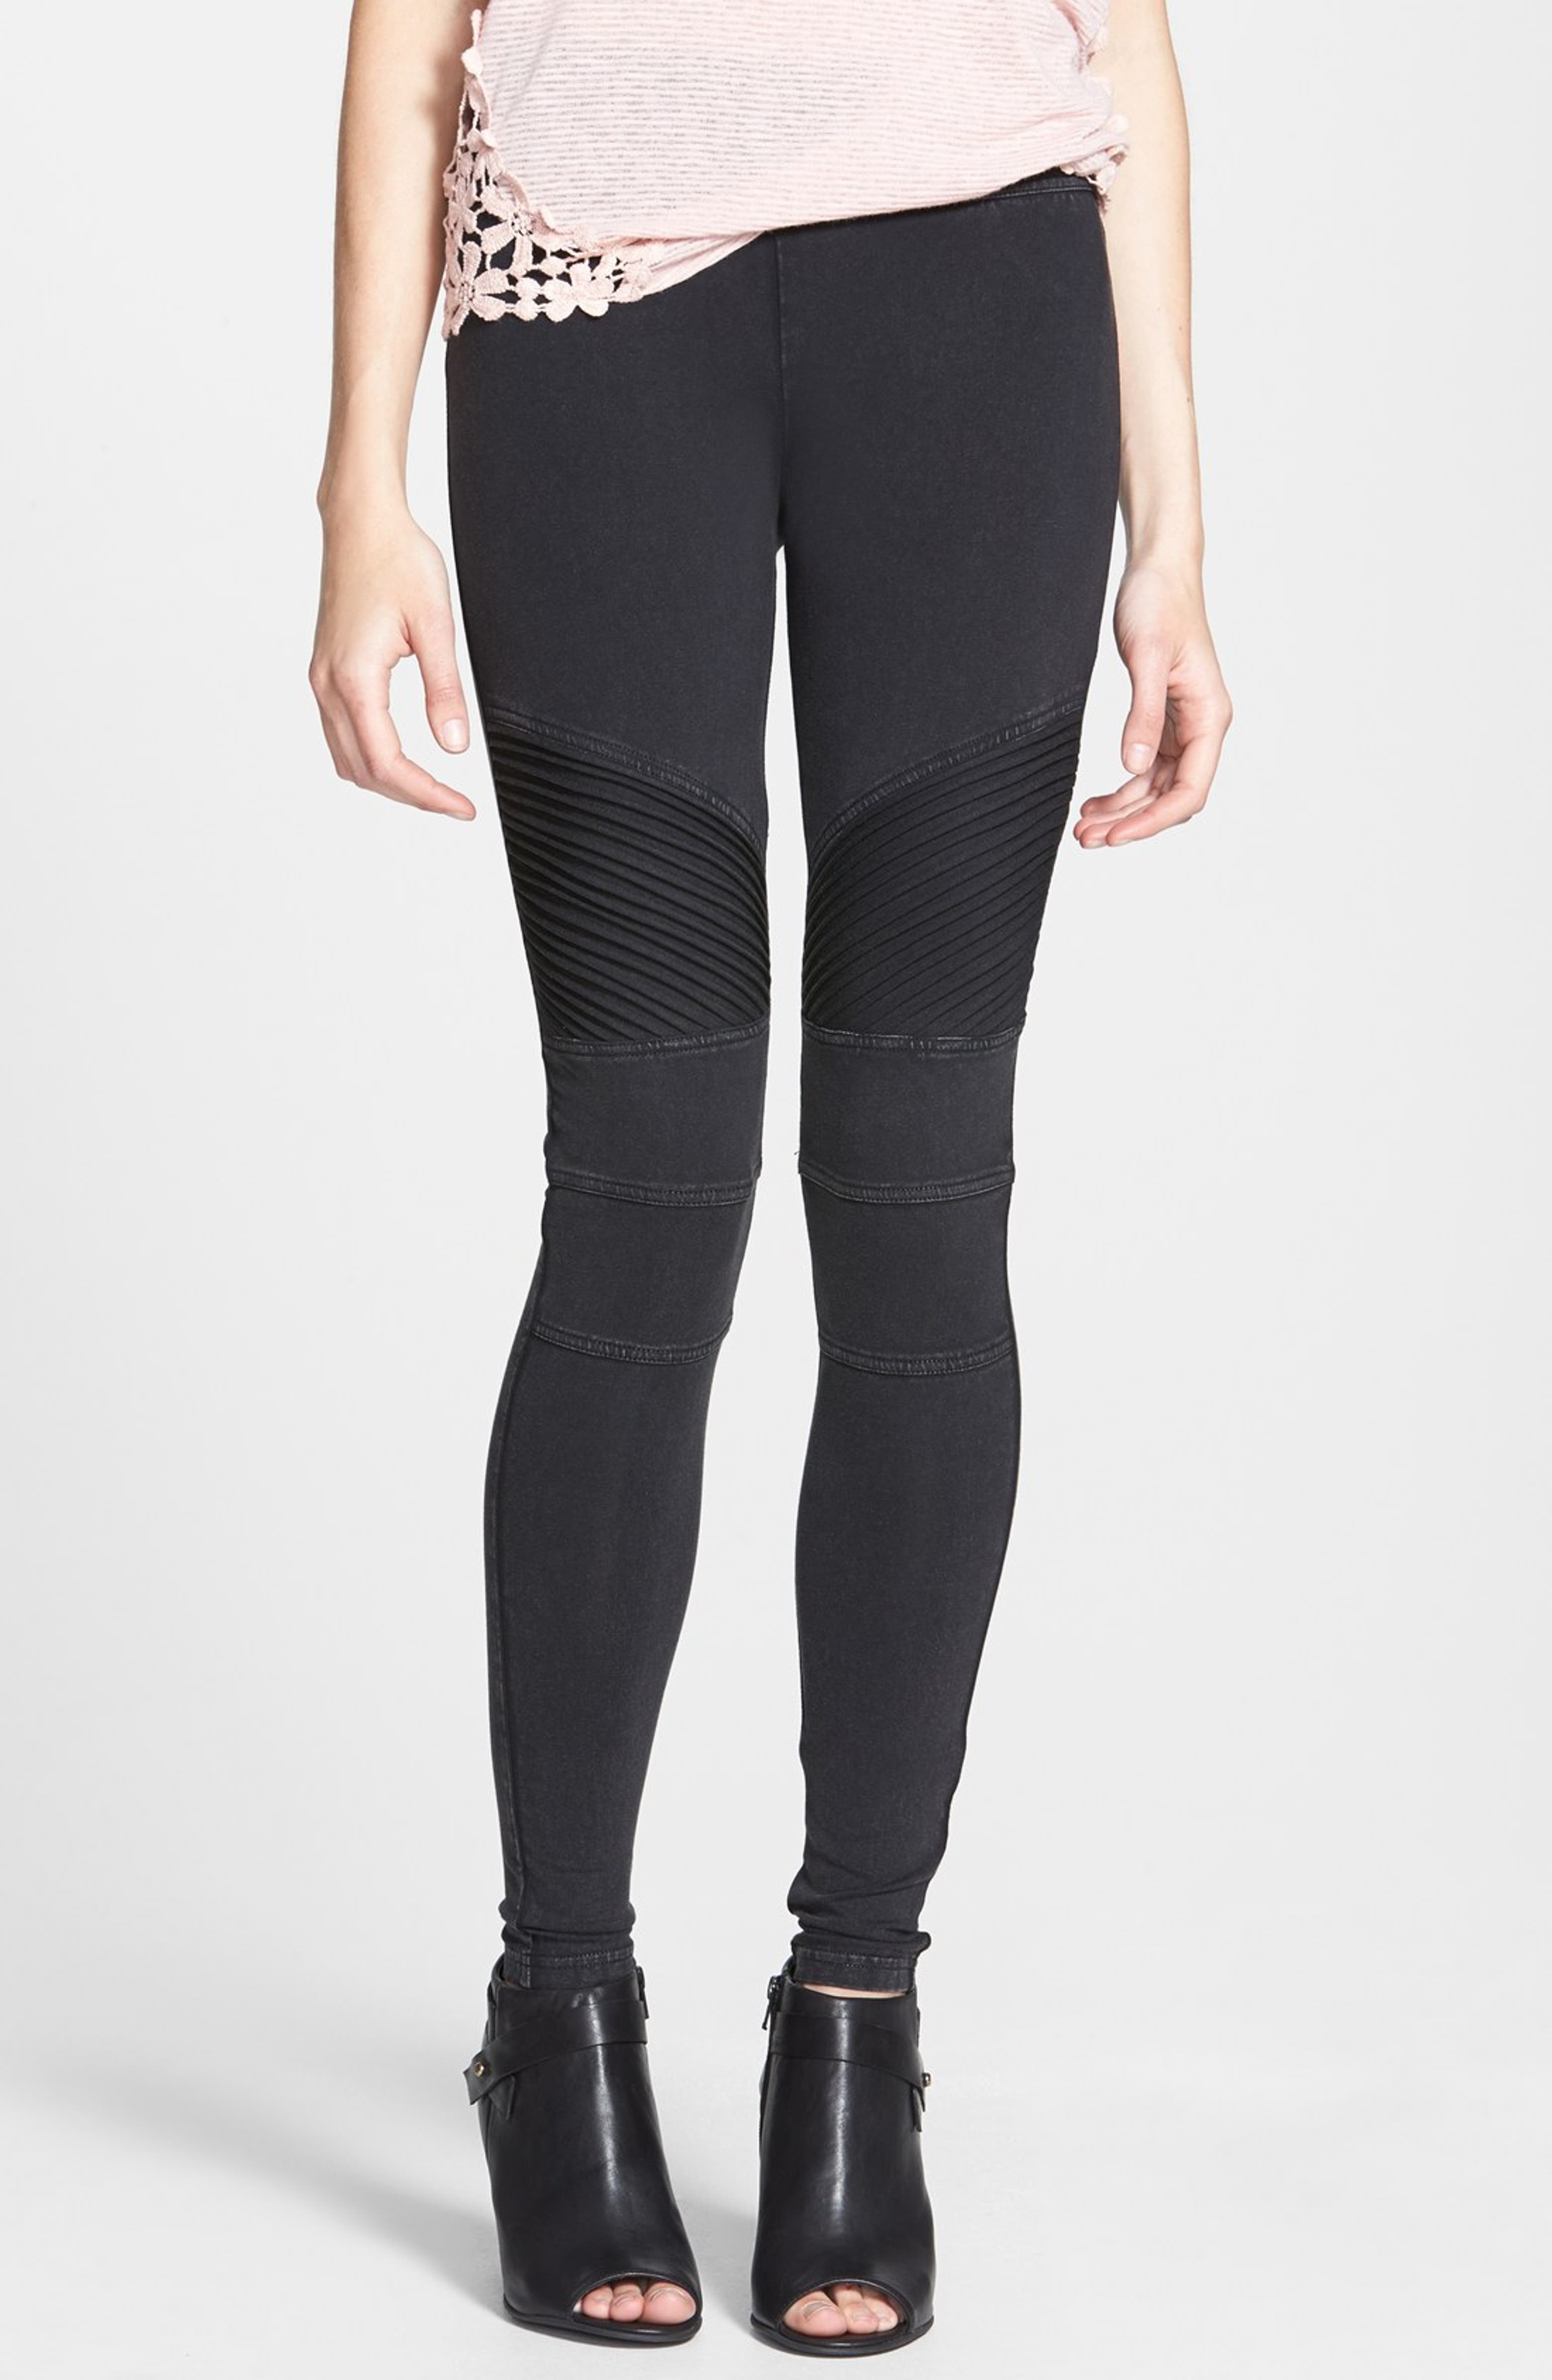 Selling Leggings From Home Canada  International Society of Precision  Agriculture